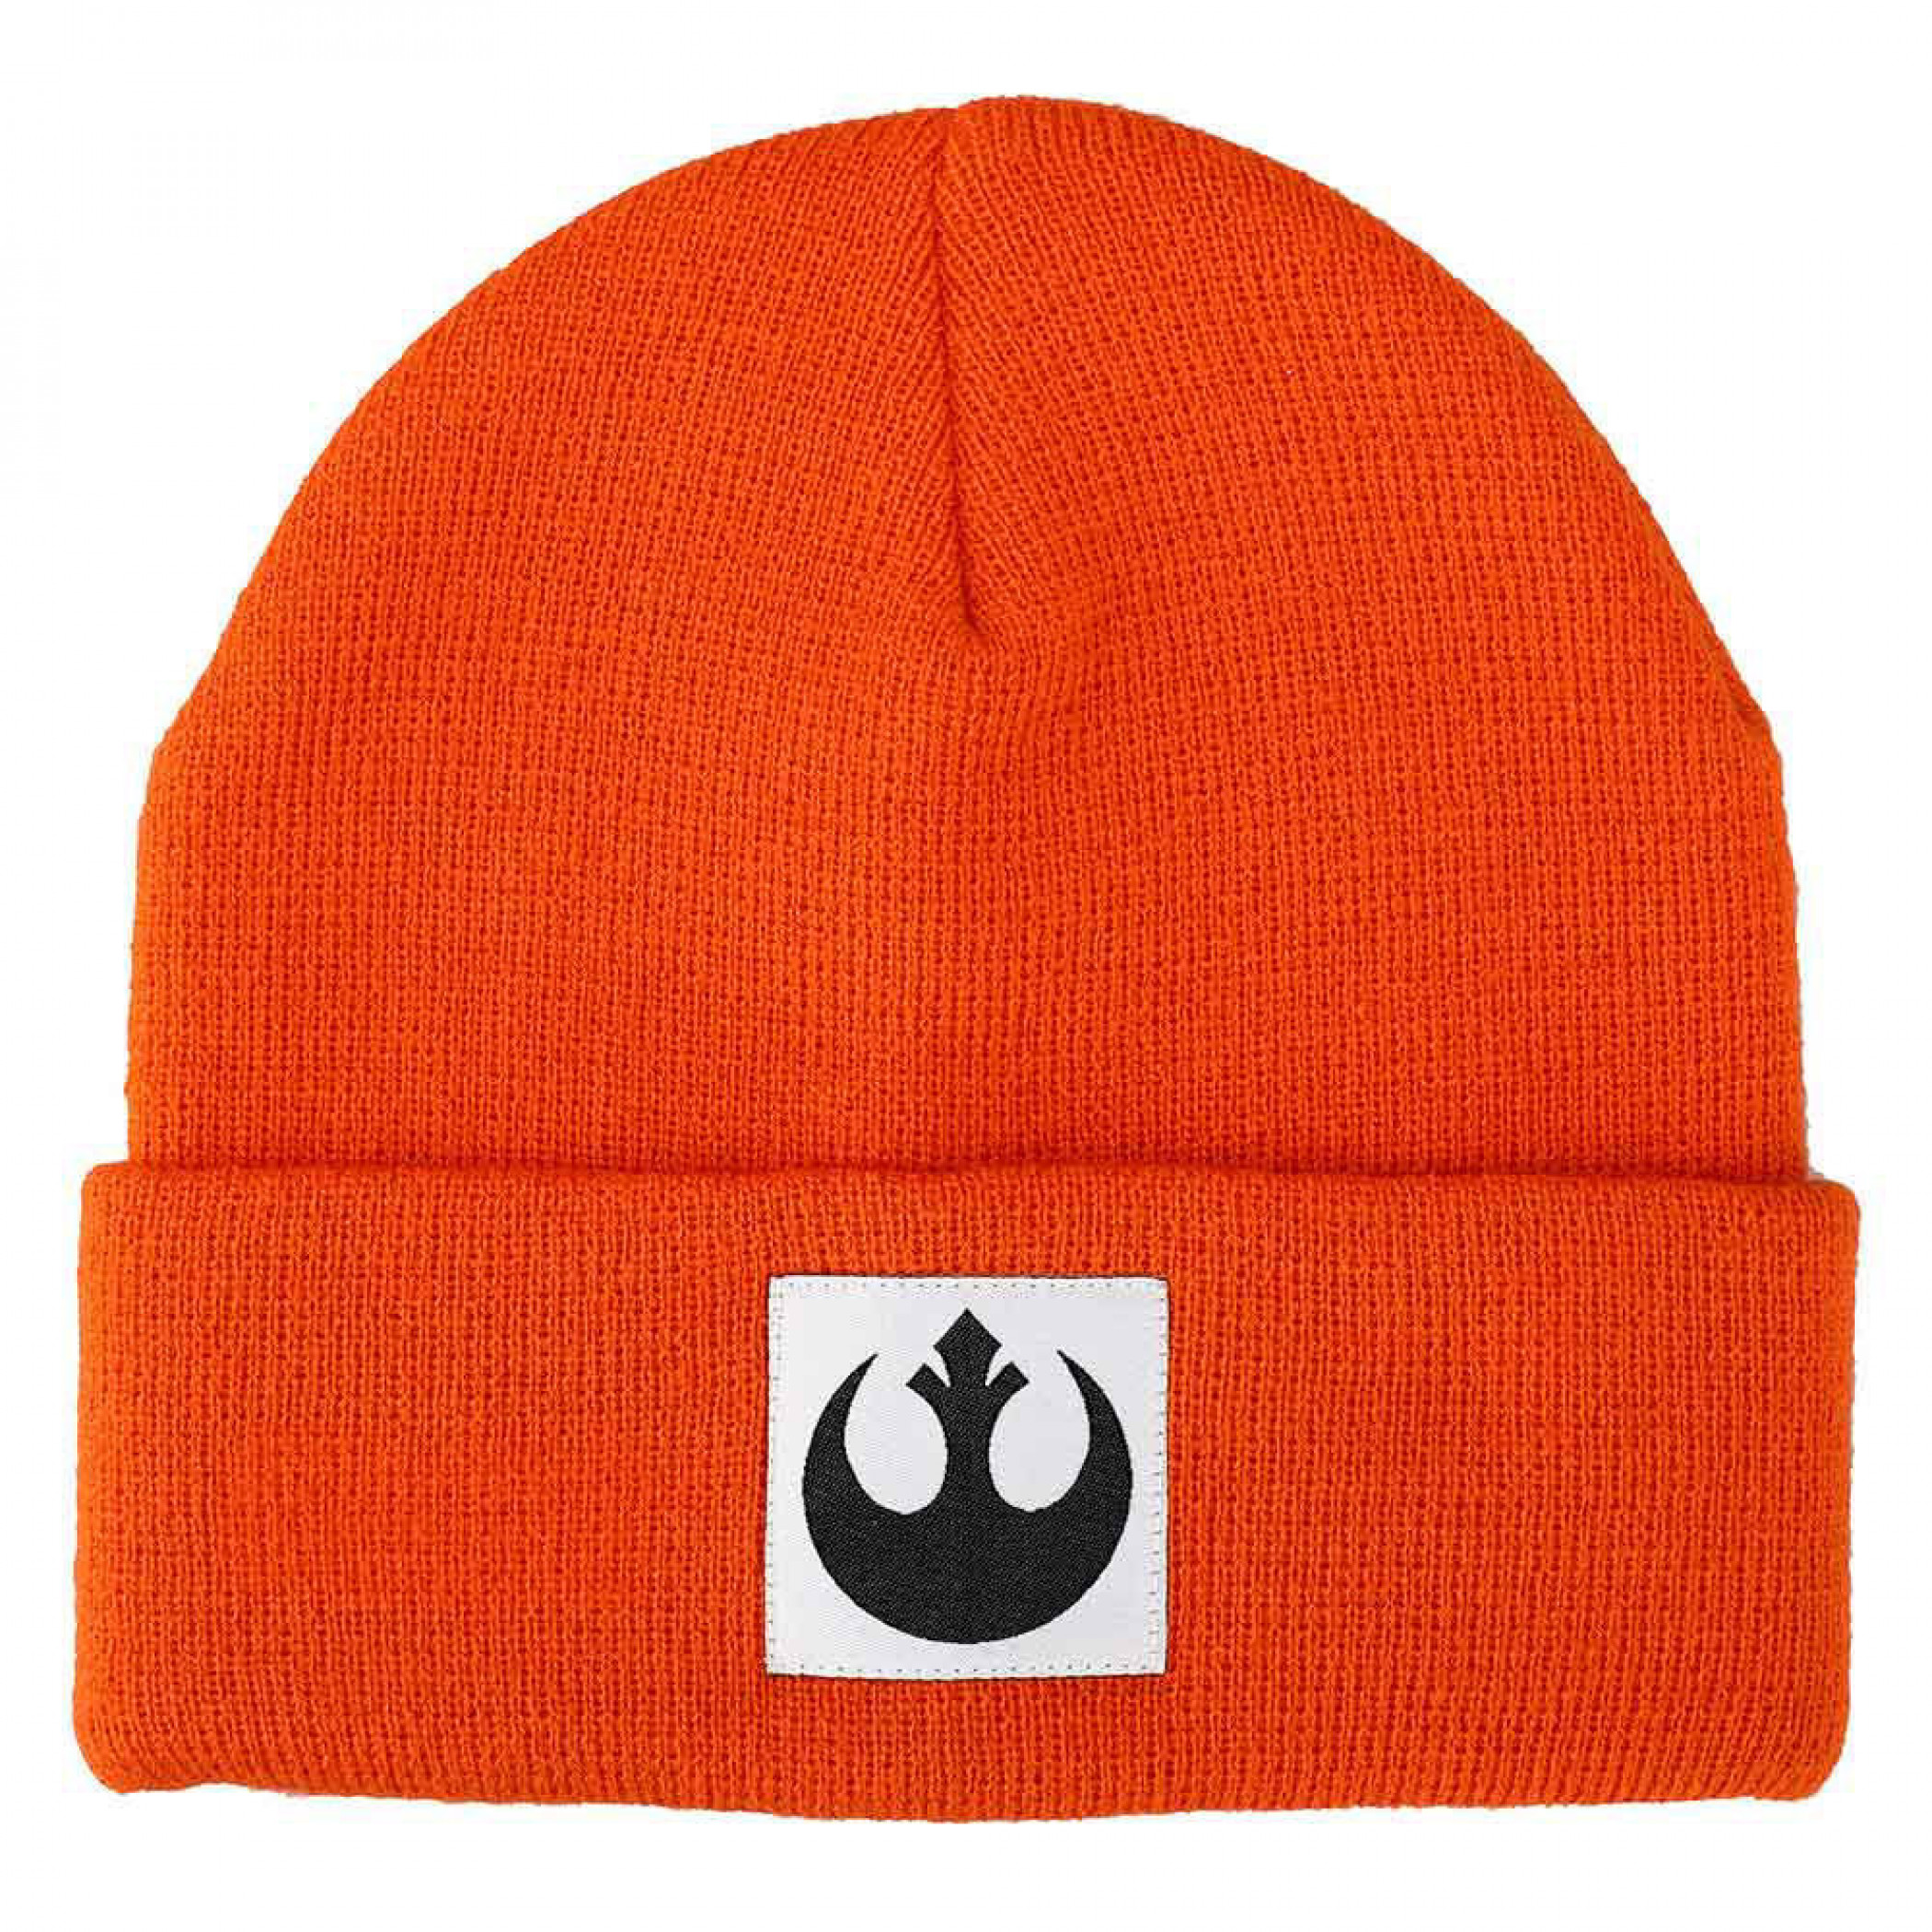 Star Wars Rebel Alliance And Galactic Empire Set of 2 Cuff Beanies